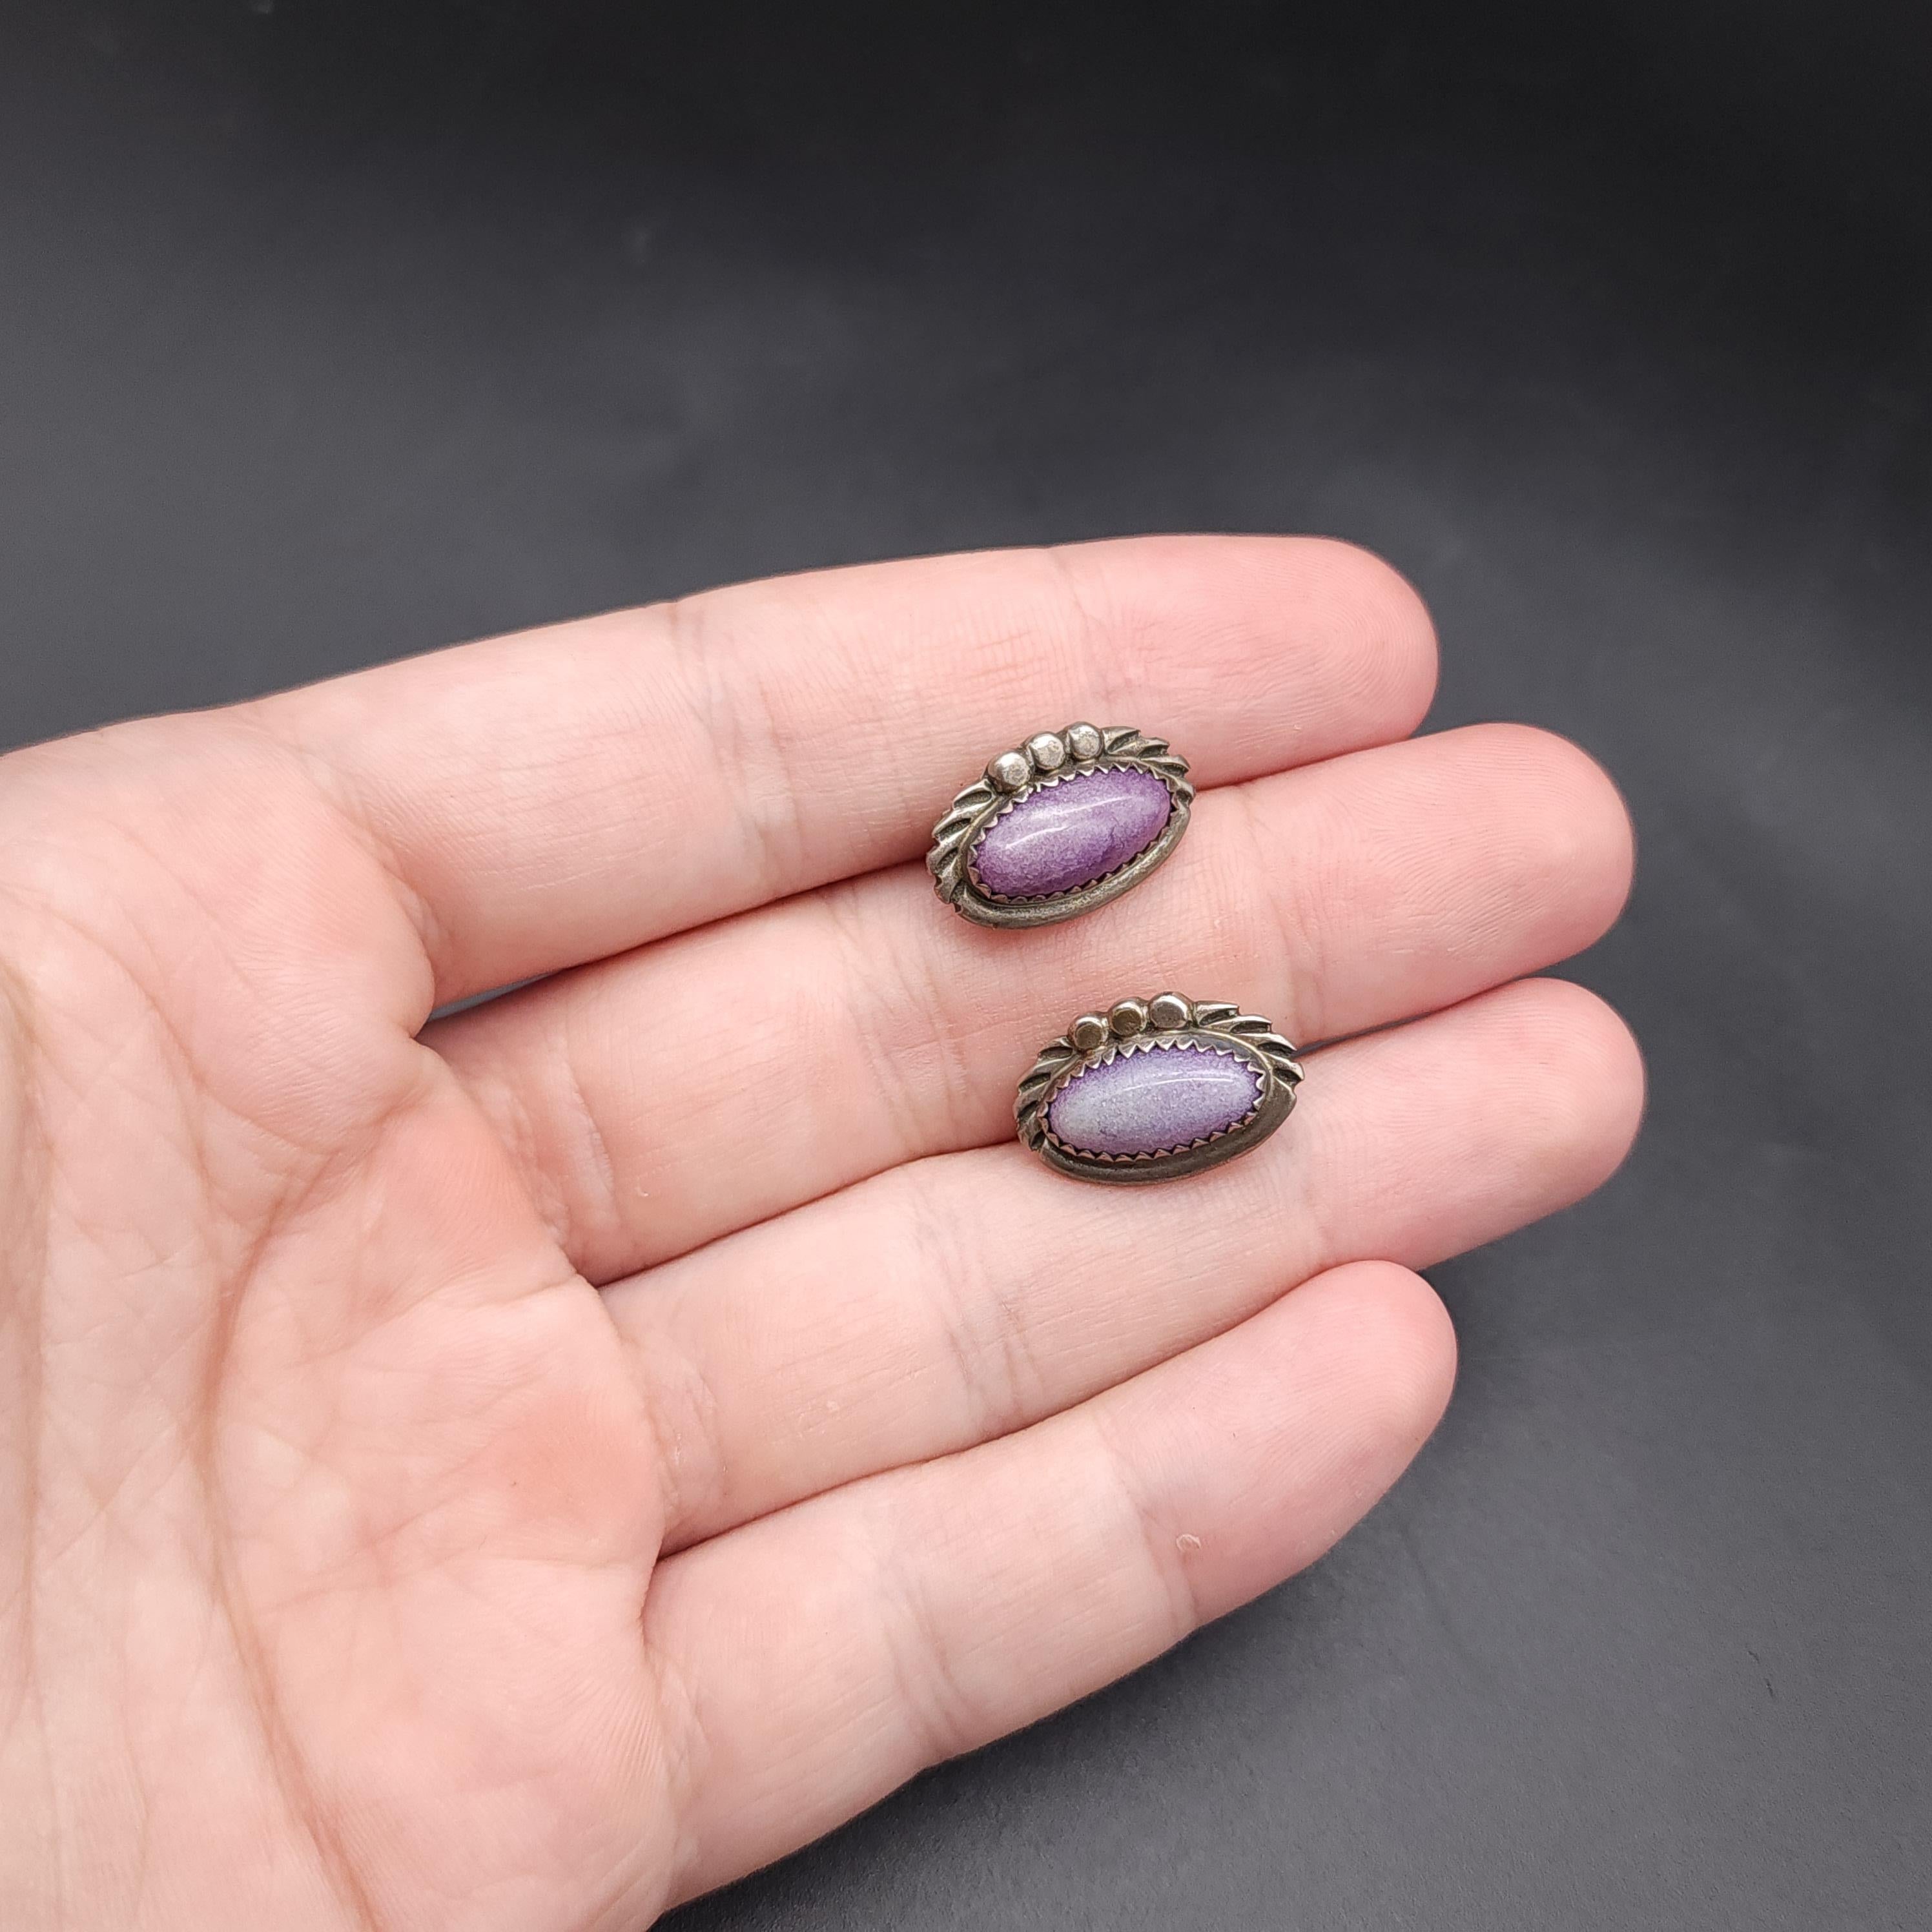 Vintage Amethyst Cabochon Clip On Earrings in Silver Tone Serrated Bezel Setting In Excellent Condition For Sale In Milford, DE